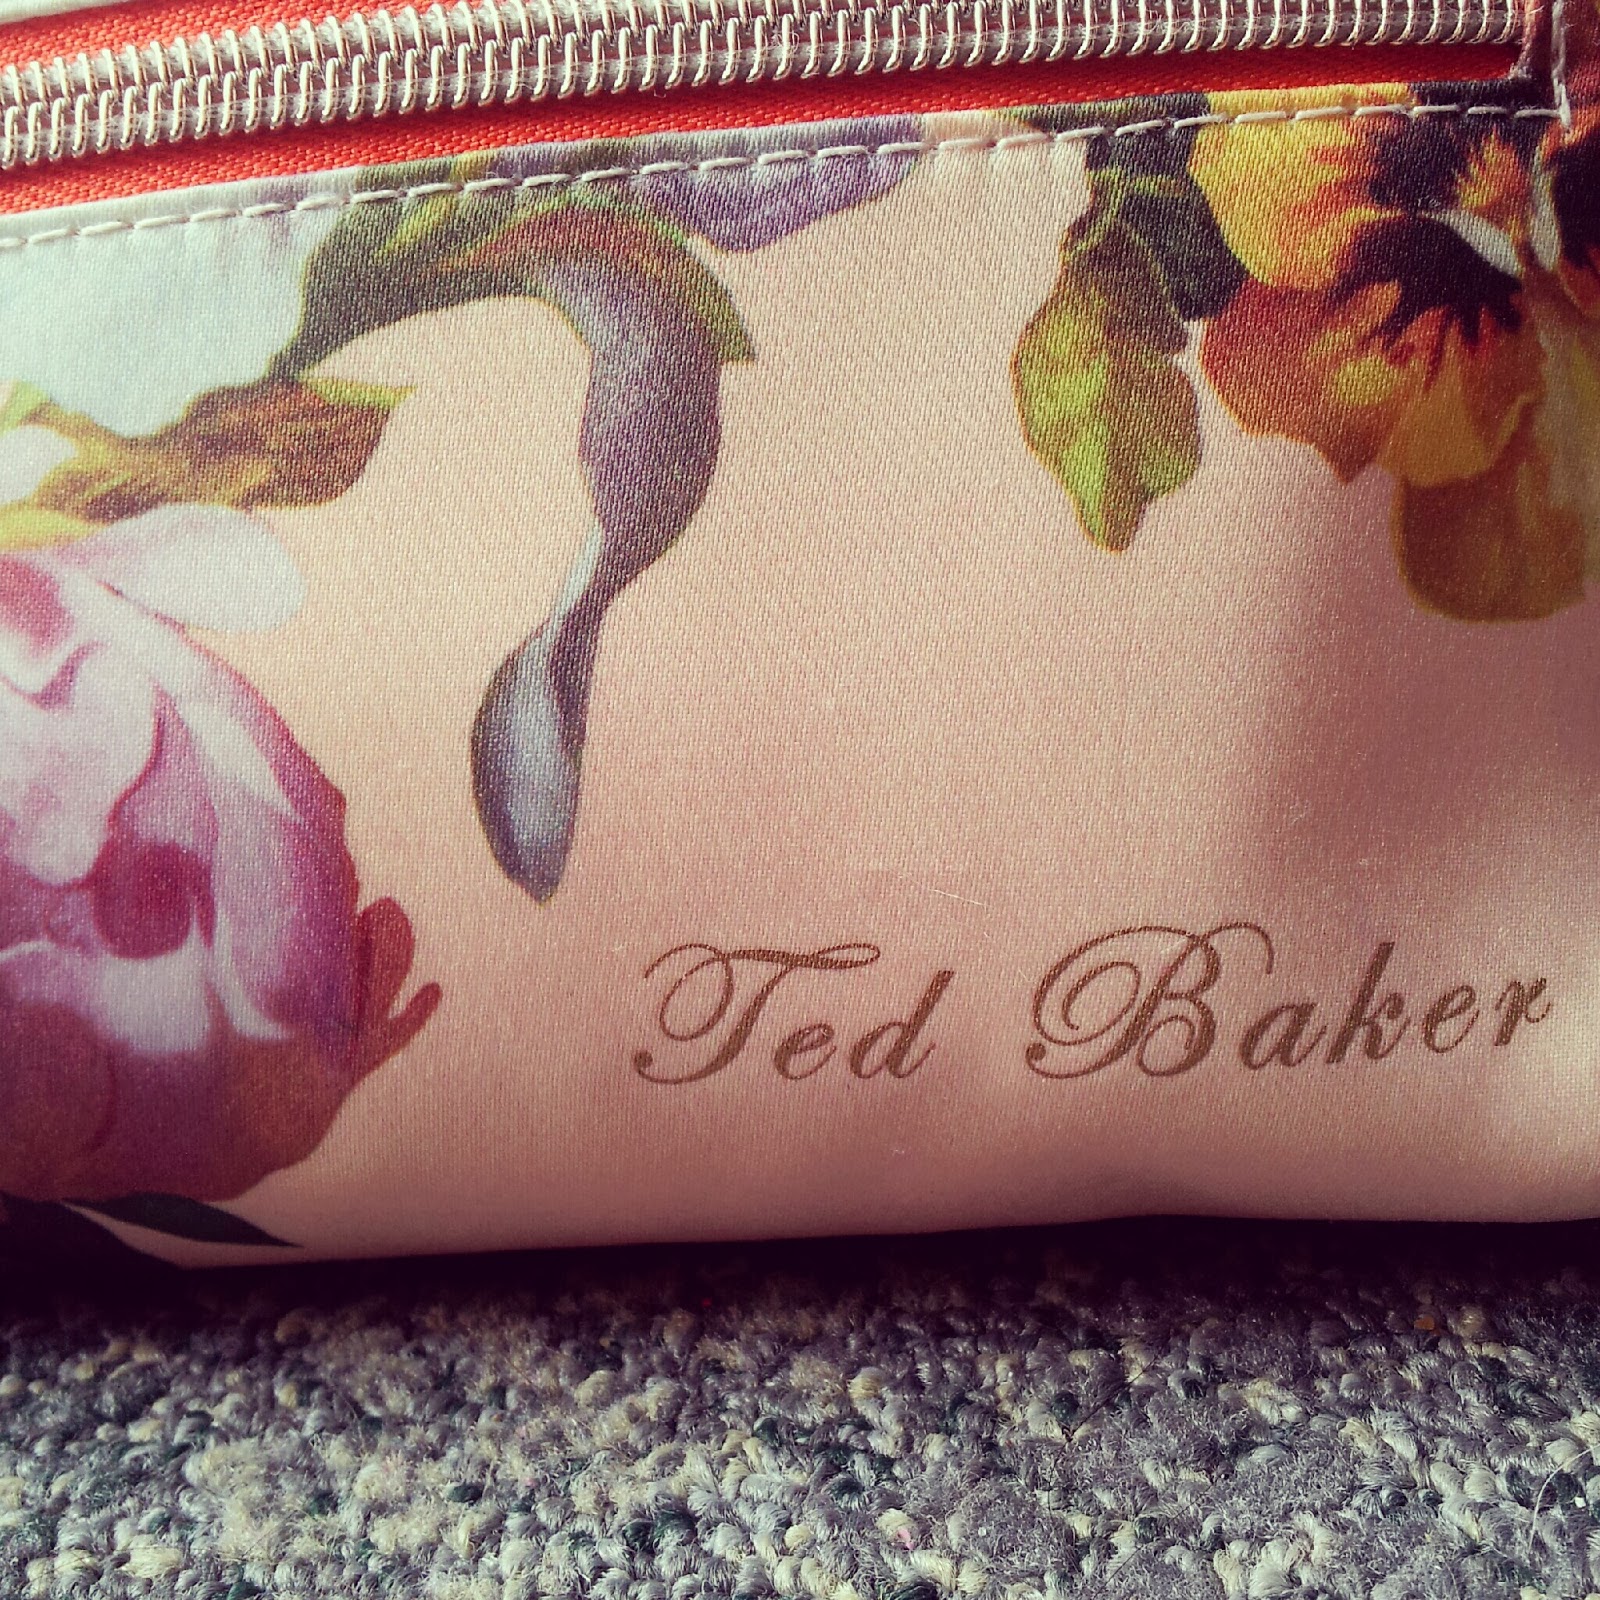 Best and Worst of Ted Baker / Ted Baker review 